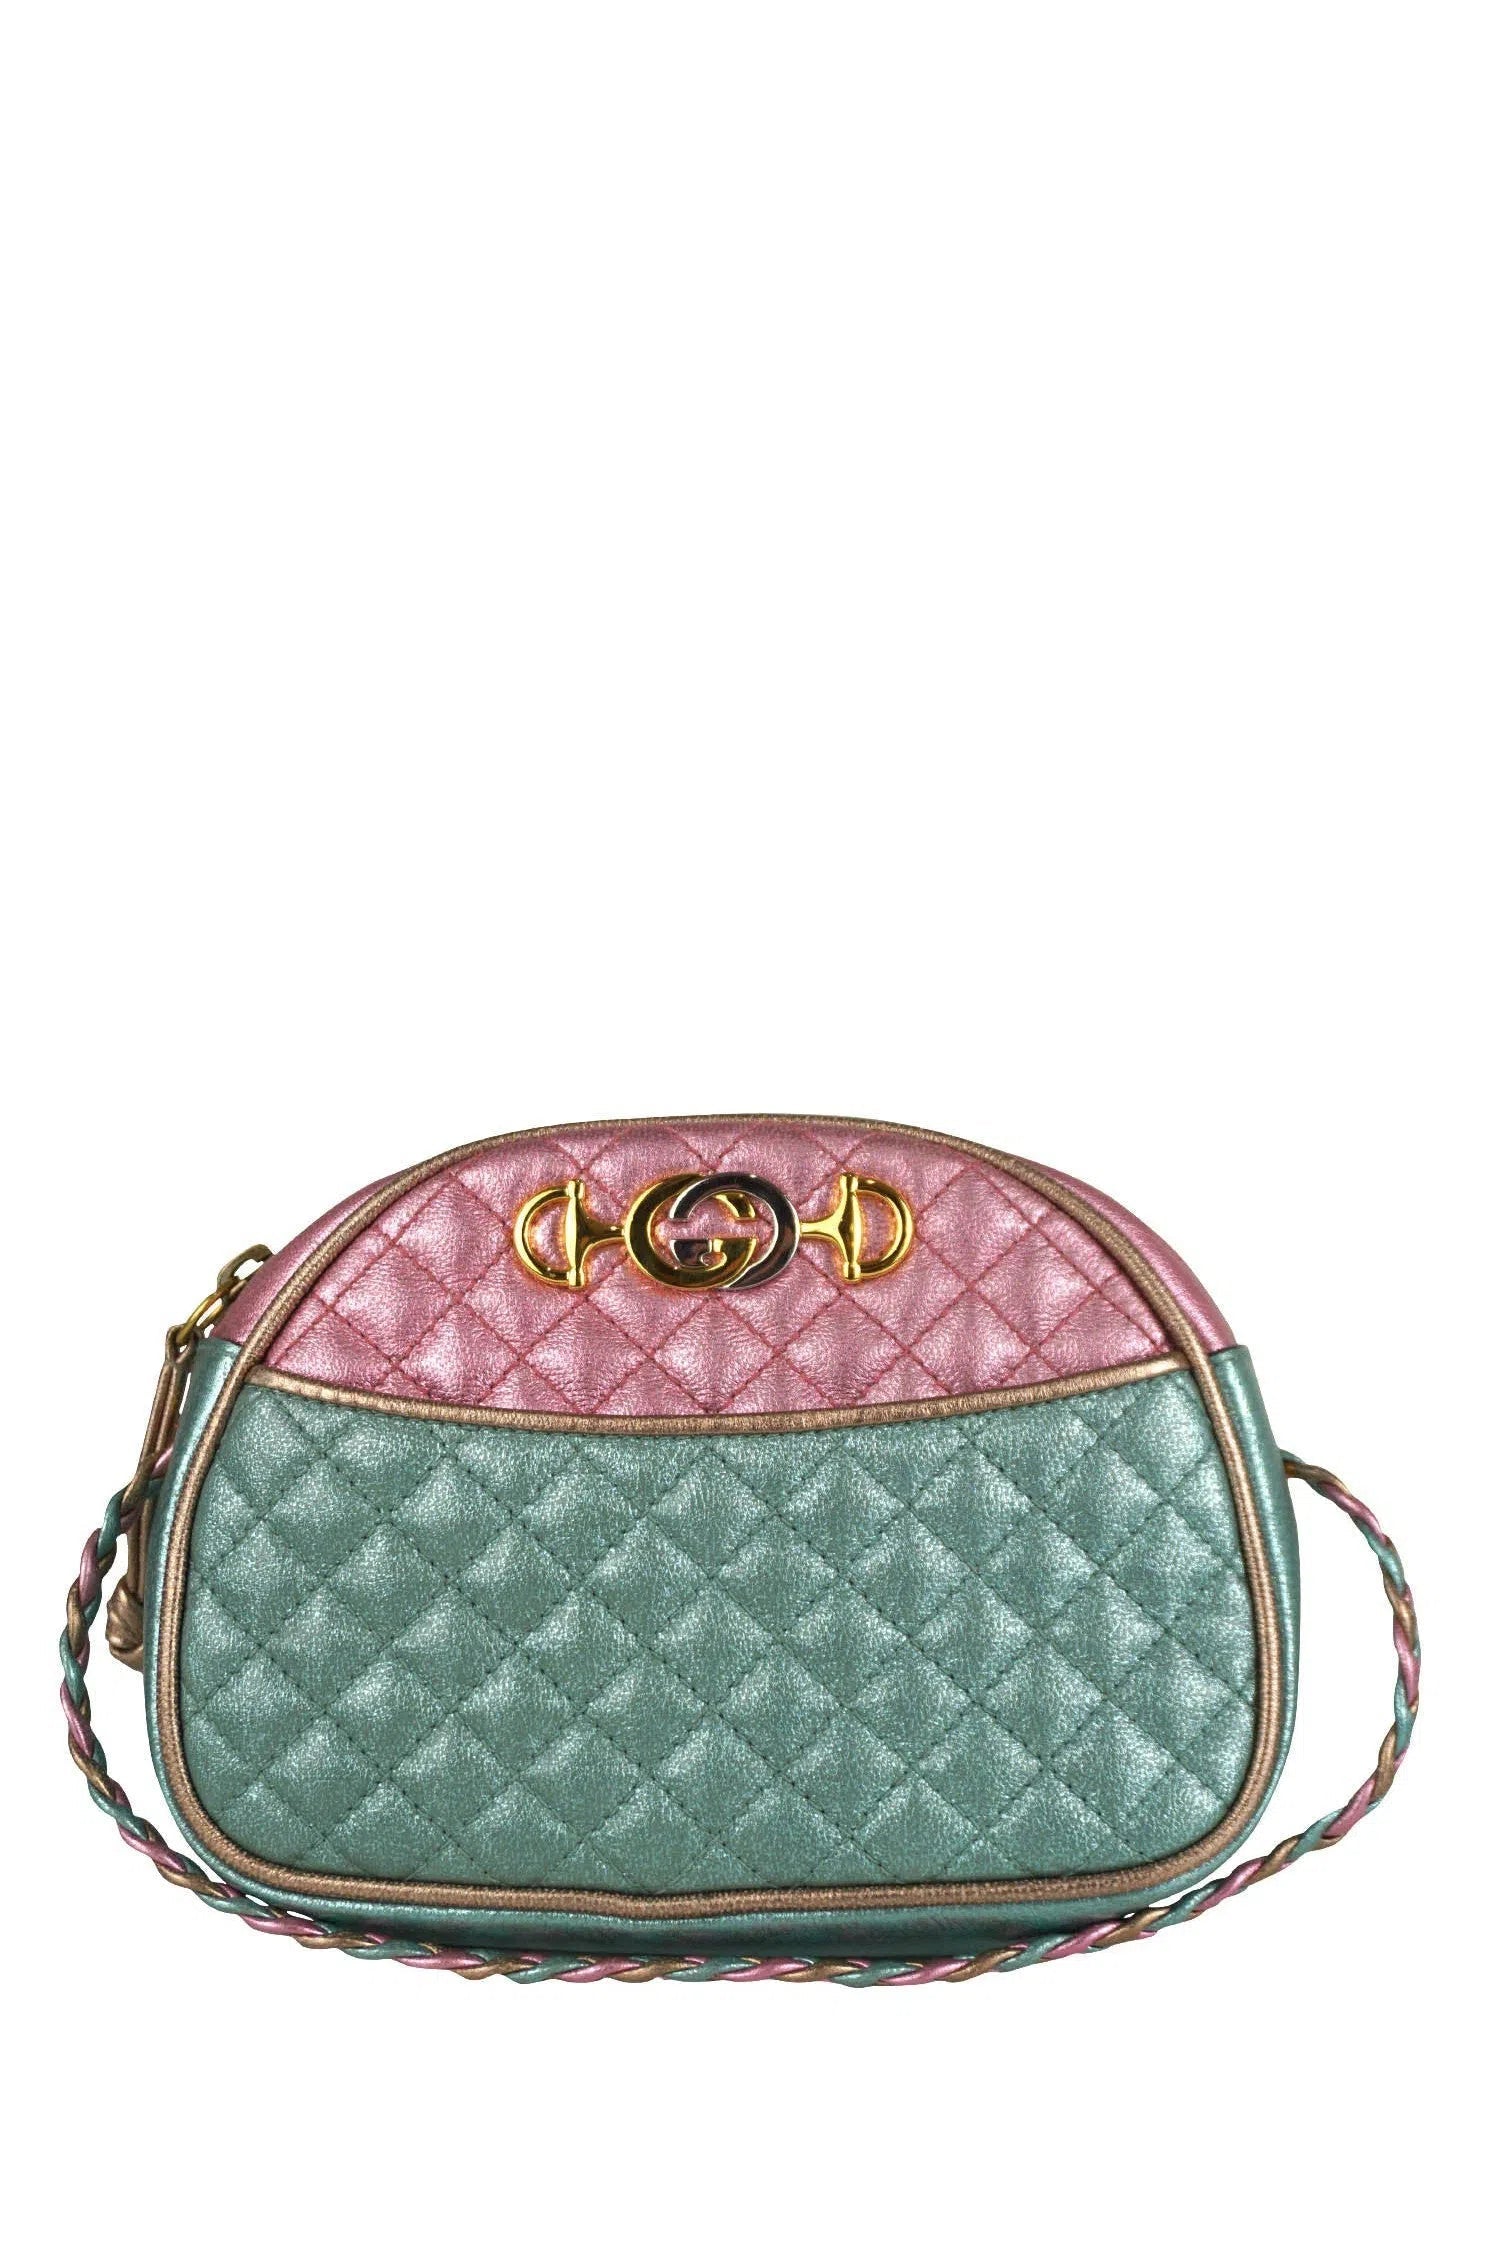 Gucci Mini Trapuntata Quilted Metallic Leather Crossbody Bag - Foxy Couture Carmel